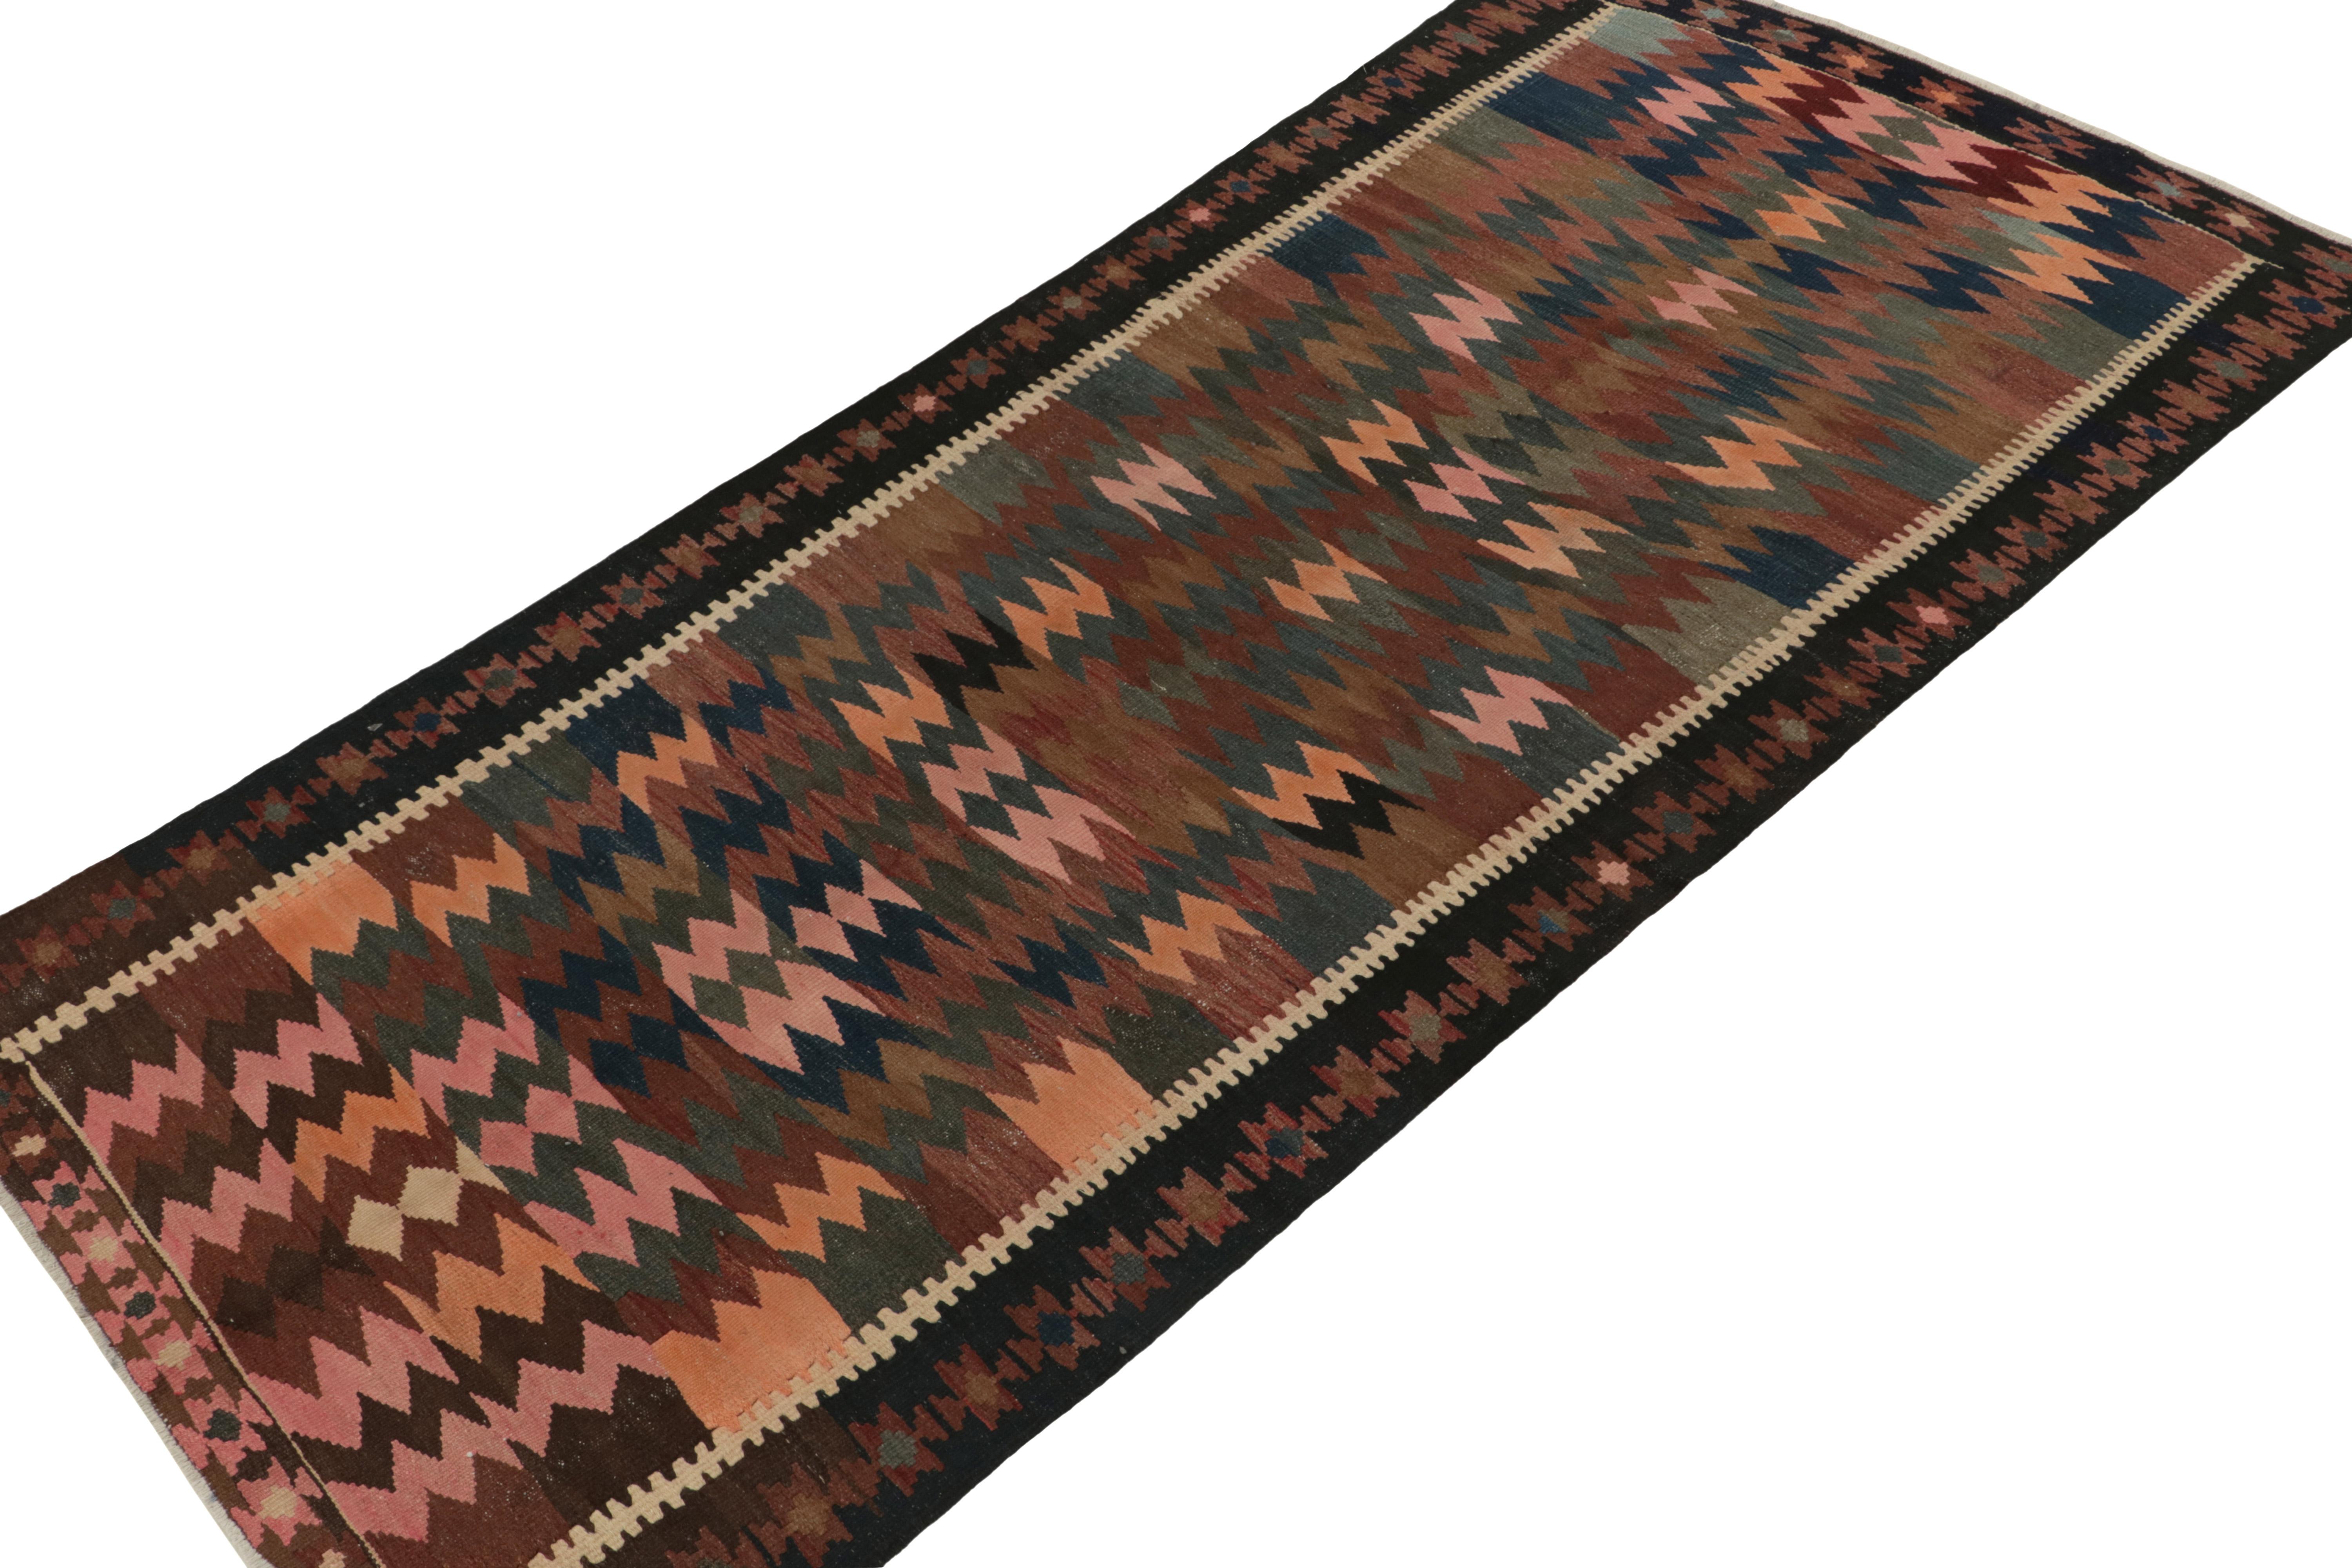 Handwoven in fine wool, a 5x10 vintage Persian kilim originating circa 1950-1960. An intriguing piece from the mid-century, the gracious scale reflects a playful colorway in pink, beige-brown, blue and green with an equally uncommon peach tone in